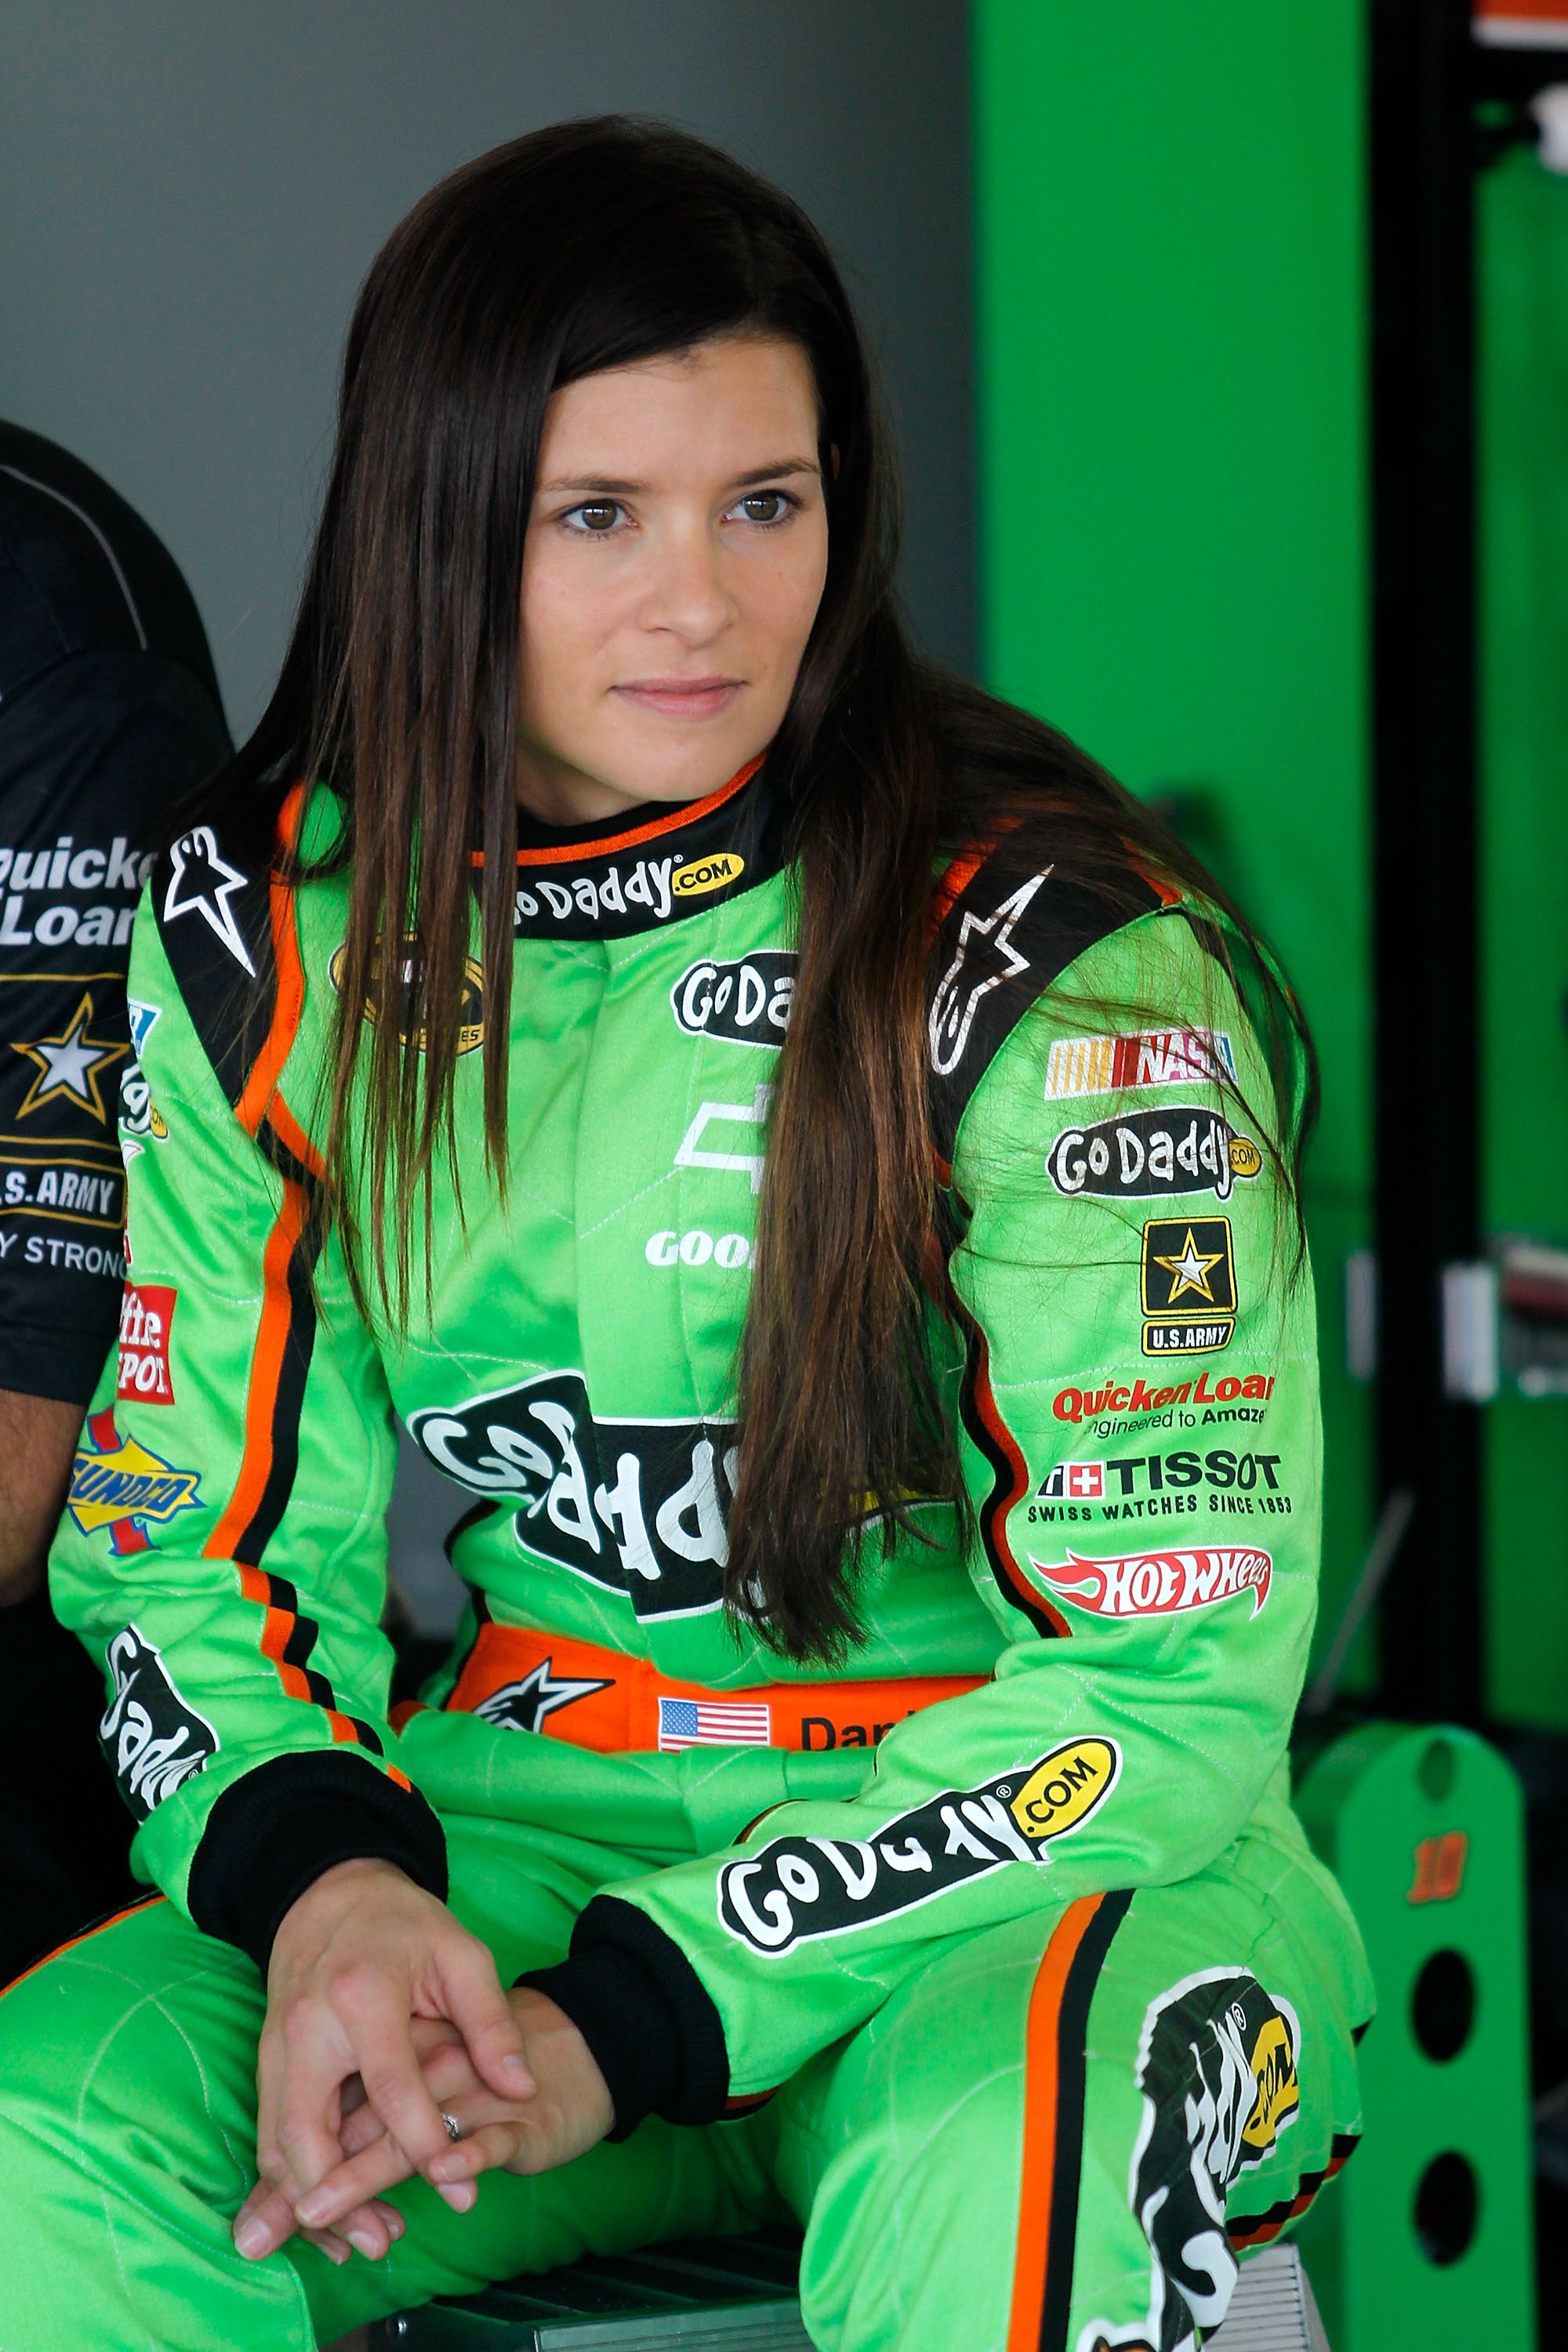 How many top-five finishes did Danica Patrick achieve in the IndyCar Series?